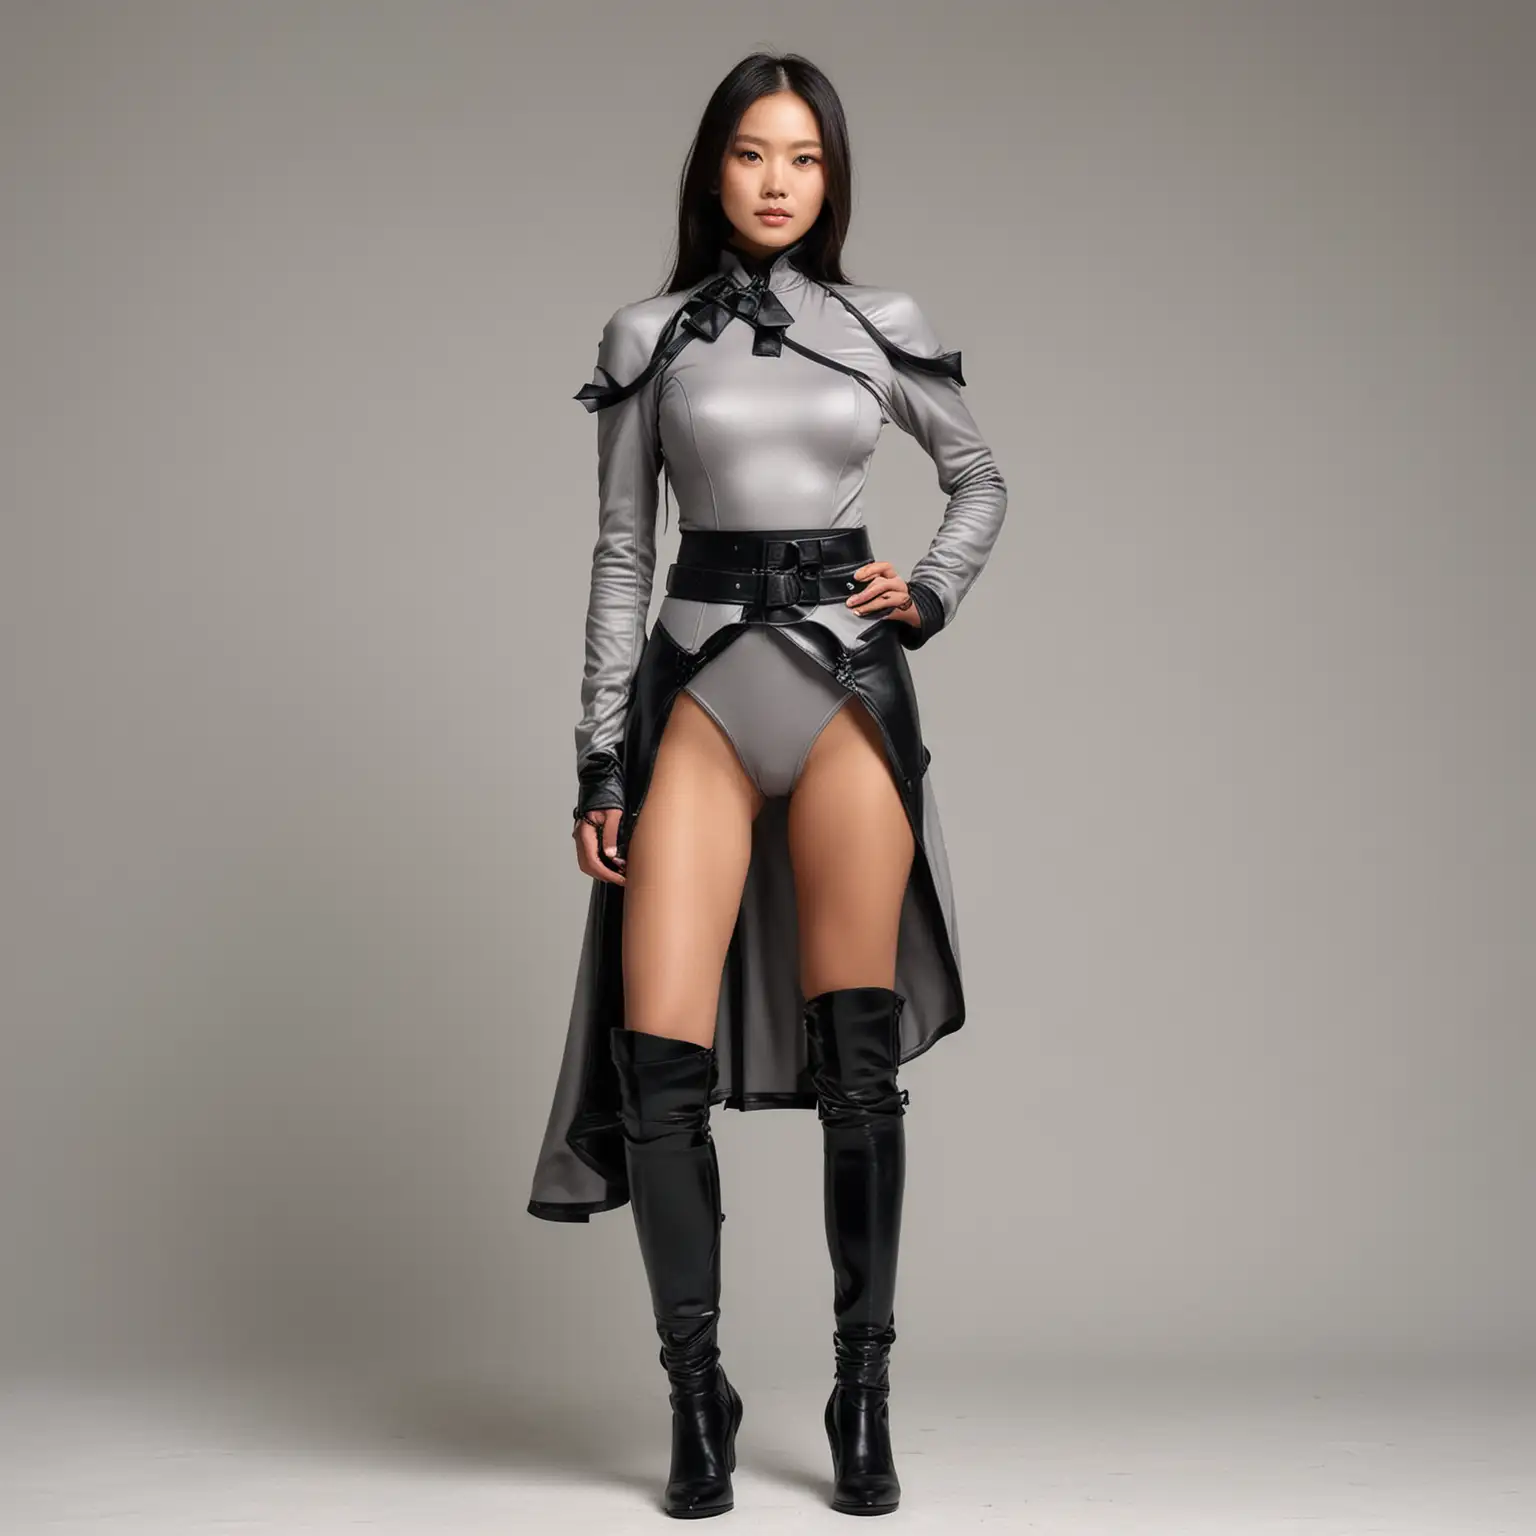 Standing full body view, toned beautiful supermodel with thin waist, long legs,large breasts, leather light-gray chinese-style turtleneck leotard one-piece with large shoulderpads, long sleeves, black samurai armor breastplate, black belt tied in giant bow, light-gray cape, black sneakers, sneakers, white background